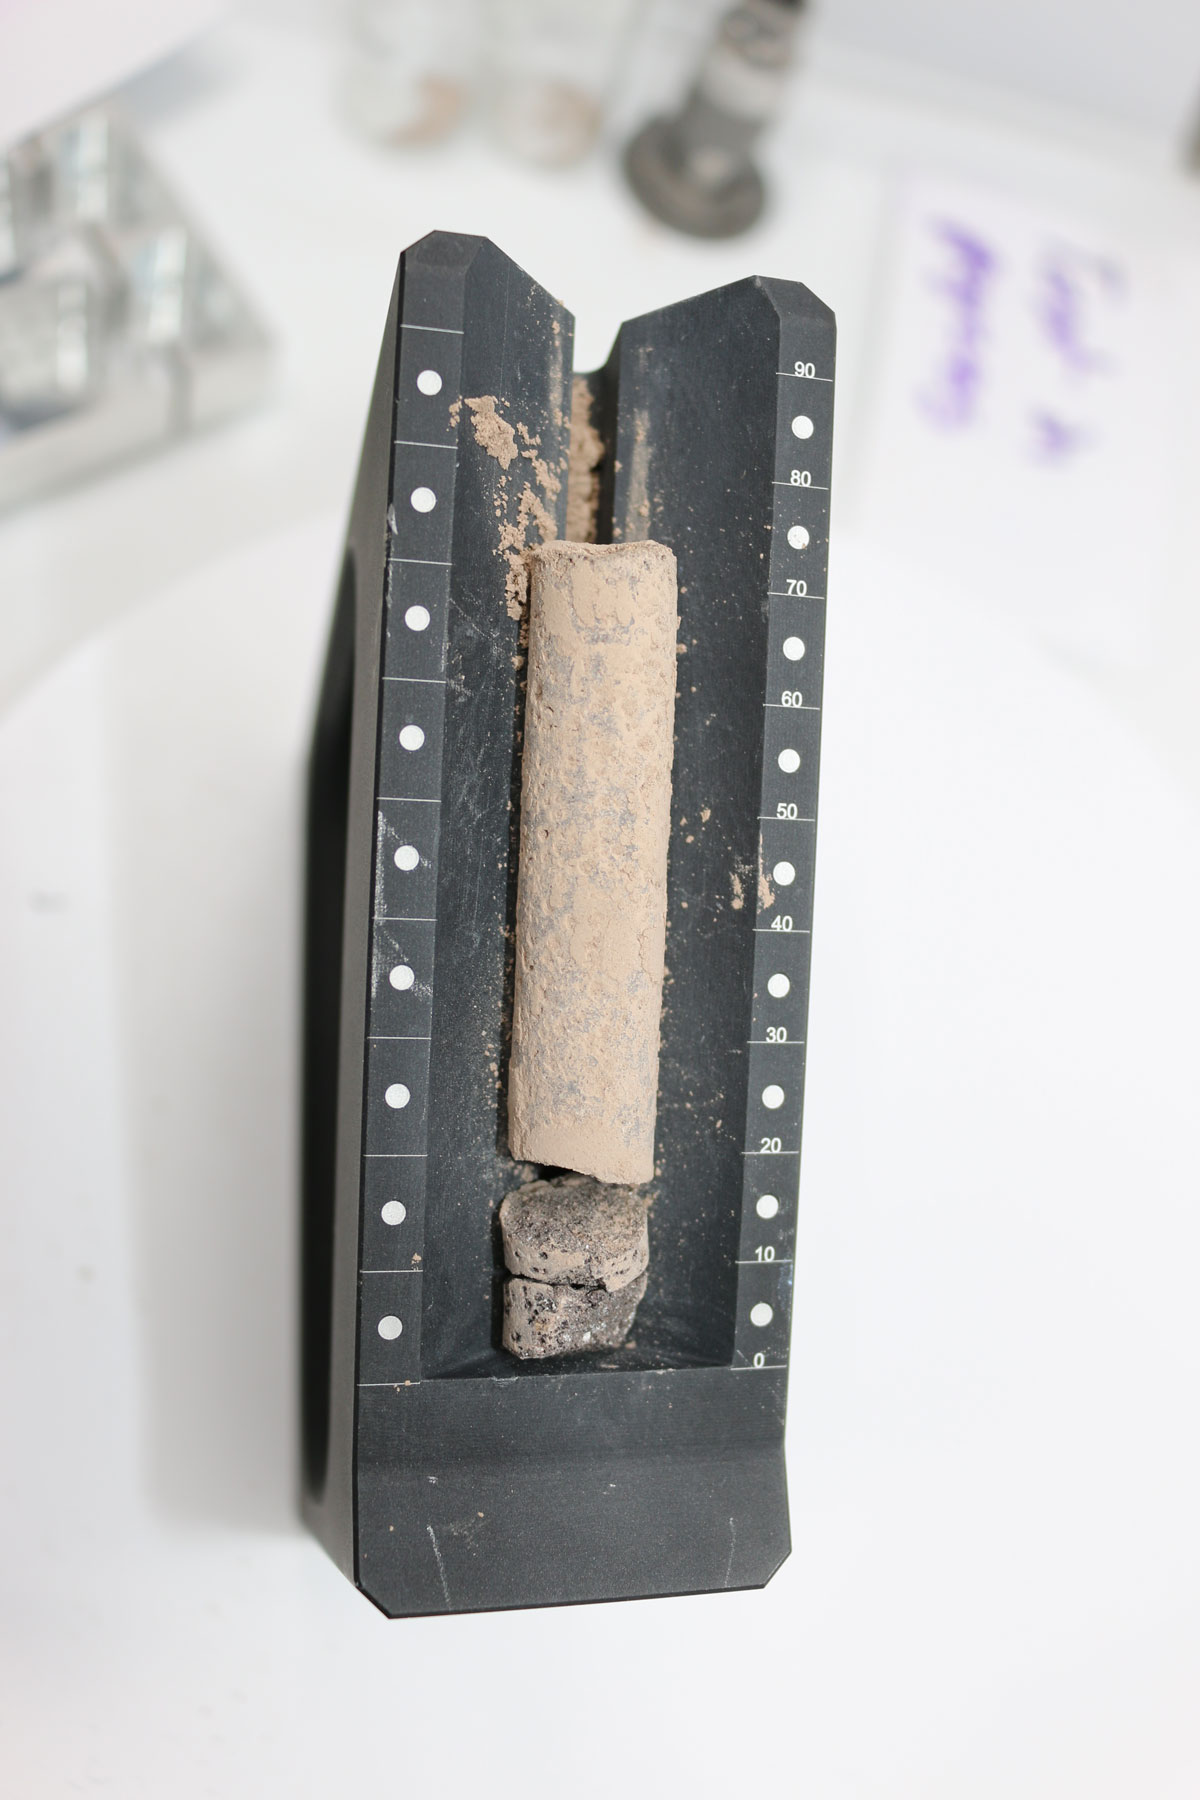 Image of a rock core testing with the Sample Caching system.